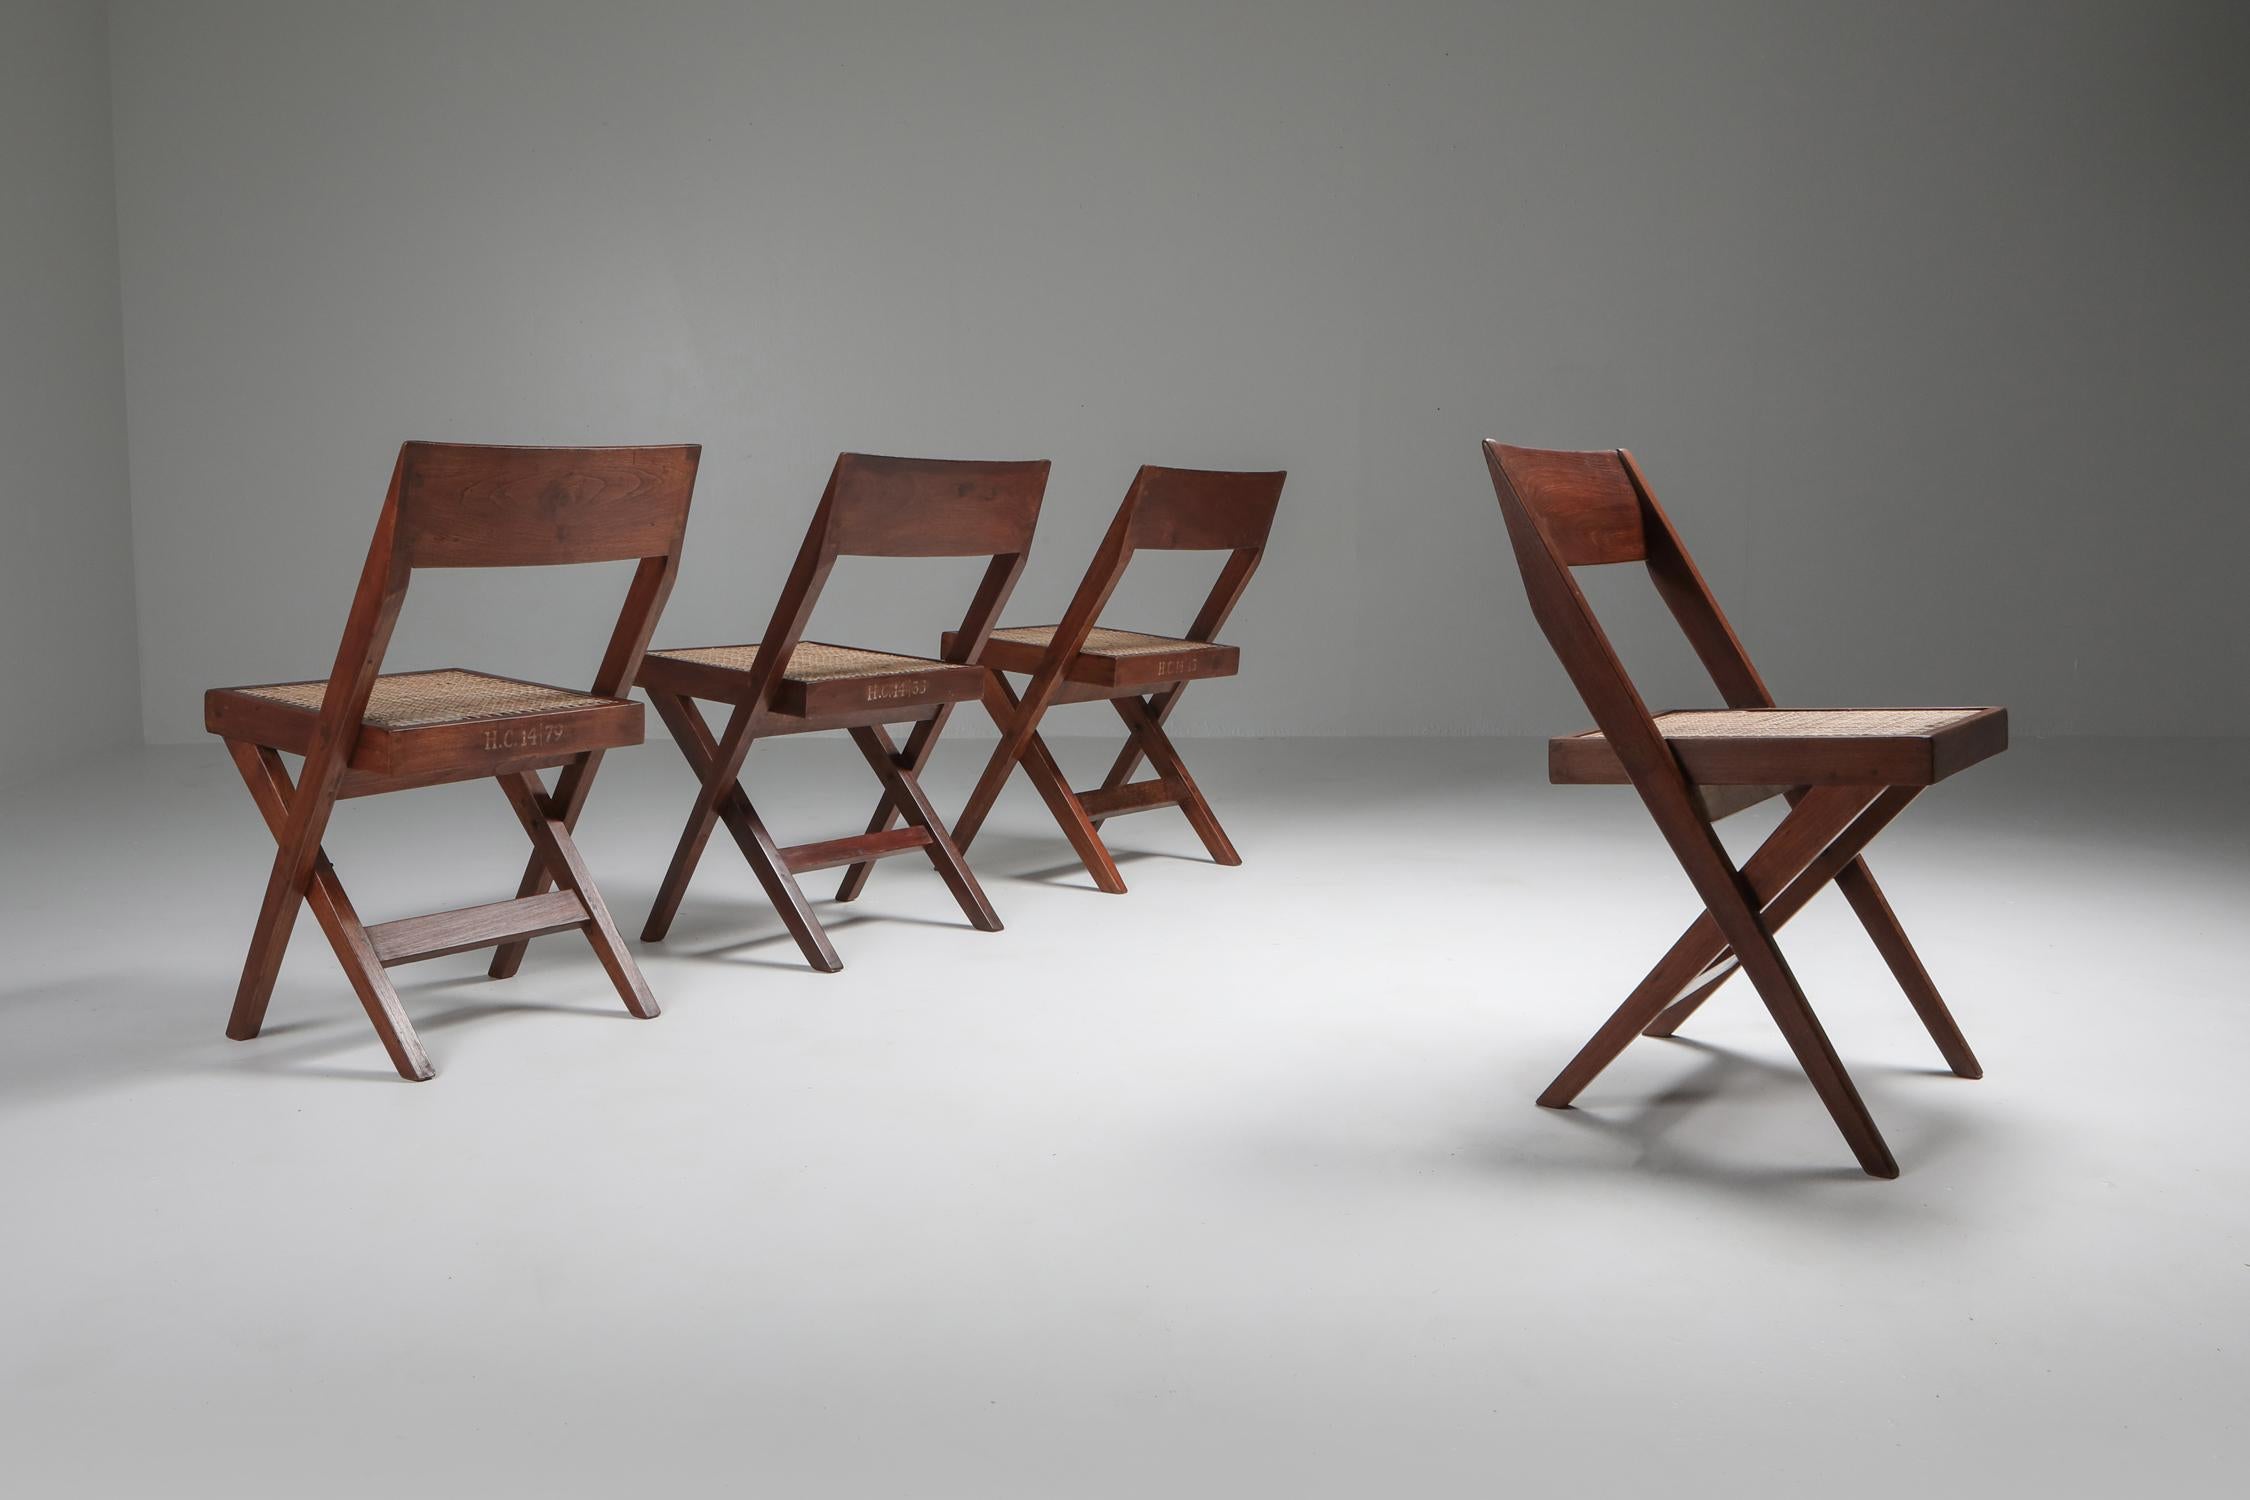 Pierre Jeanneret, library chair, set of four, India, 1952-1965

H.C 14 / 33, 43, 47, 79
Meaning chairs nr 33, 43, 47, 79 for Room 14 of the High Court of Chandigarh
It's a rare feat to have the chairs perfectly identifiable.

Another